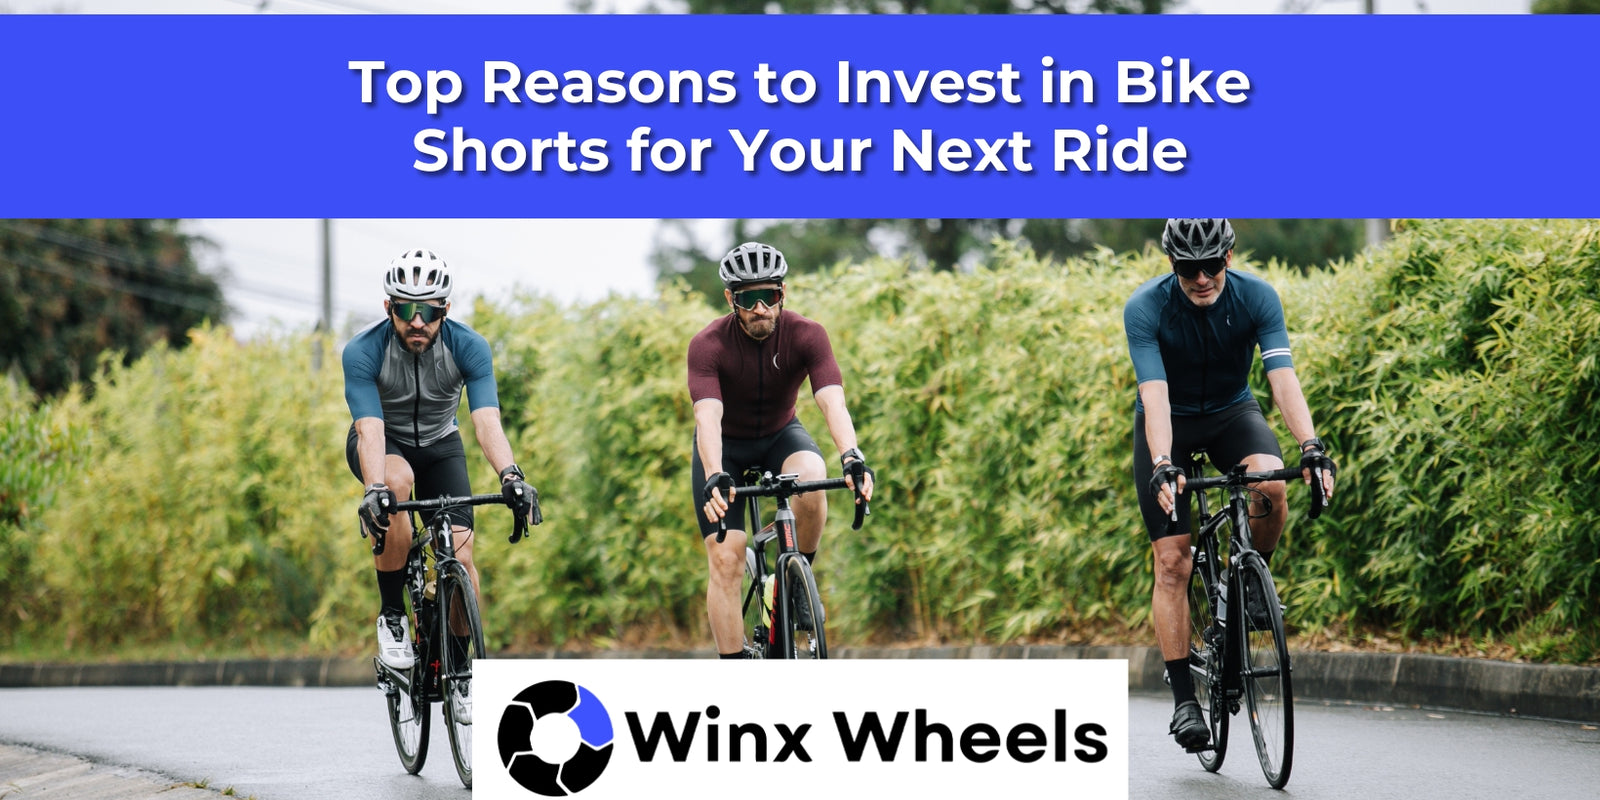 Top Reasons to Invest in Bike Shorts for Your Next Ride